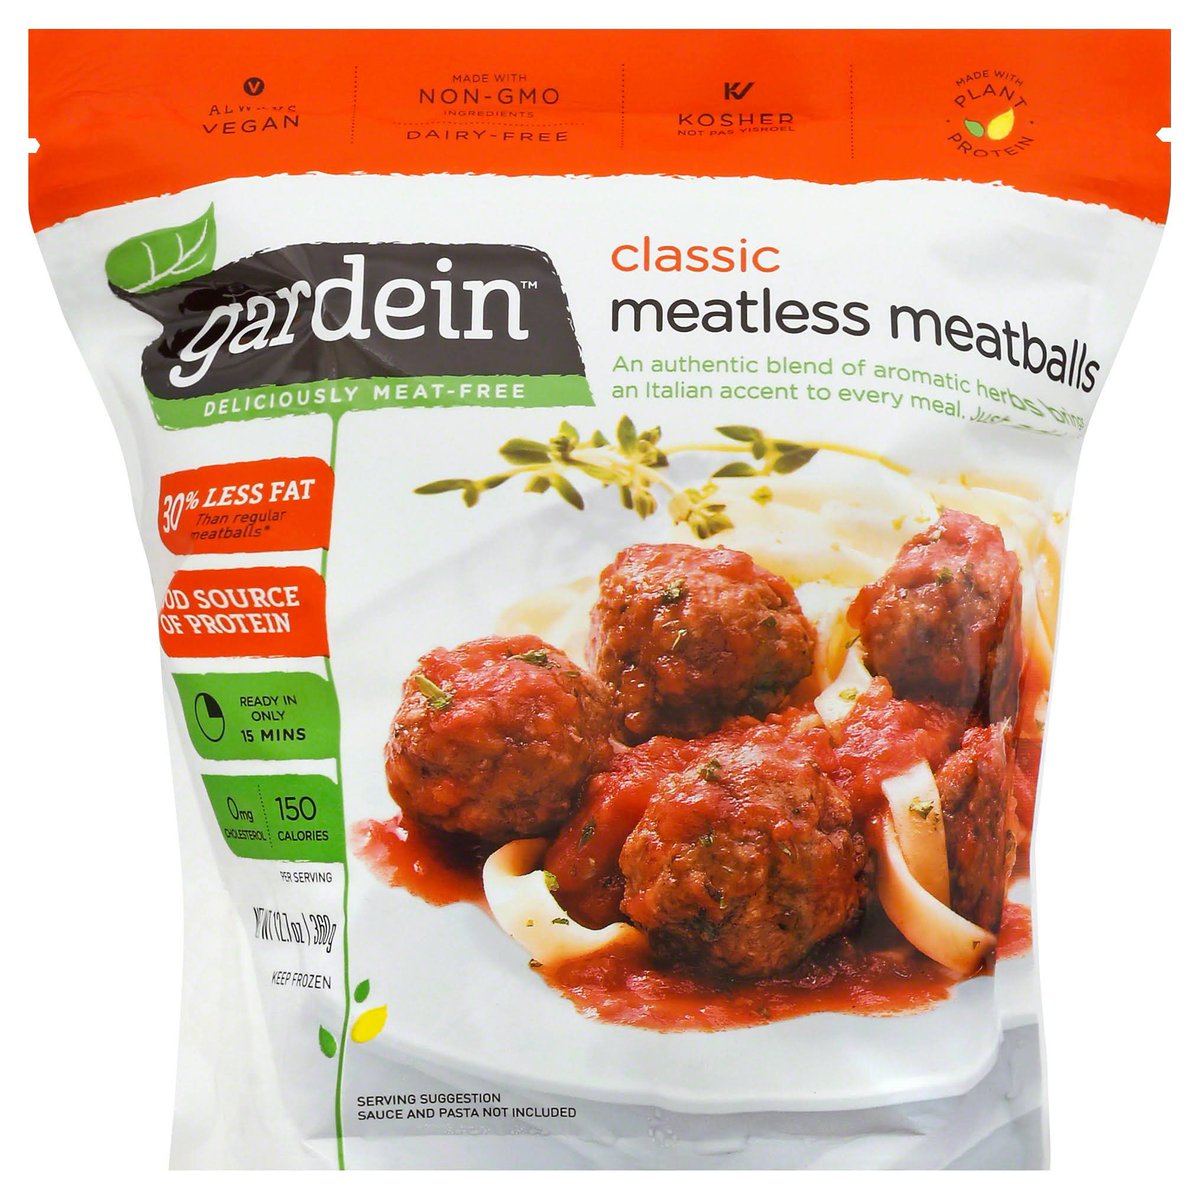 Worried about protein? IT AINT NO PROBLEM! these have 16g per three meatballs. SO GOOD. Omg ladies and gents let me PUT YOU ON